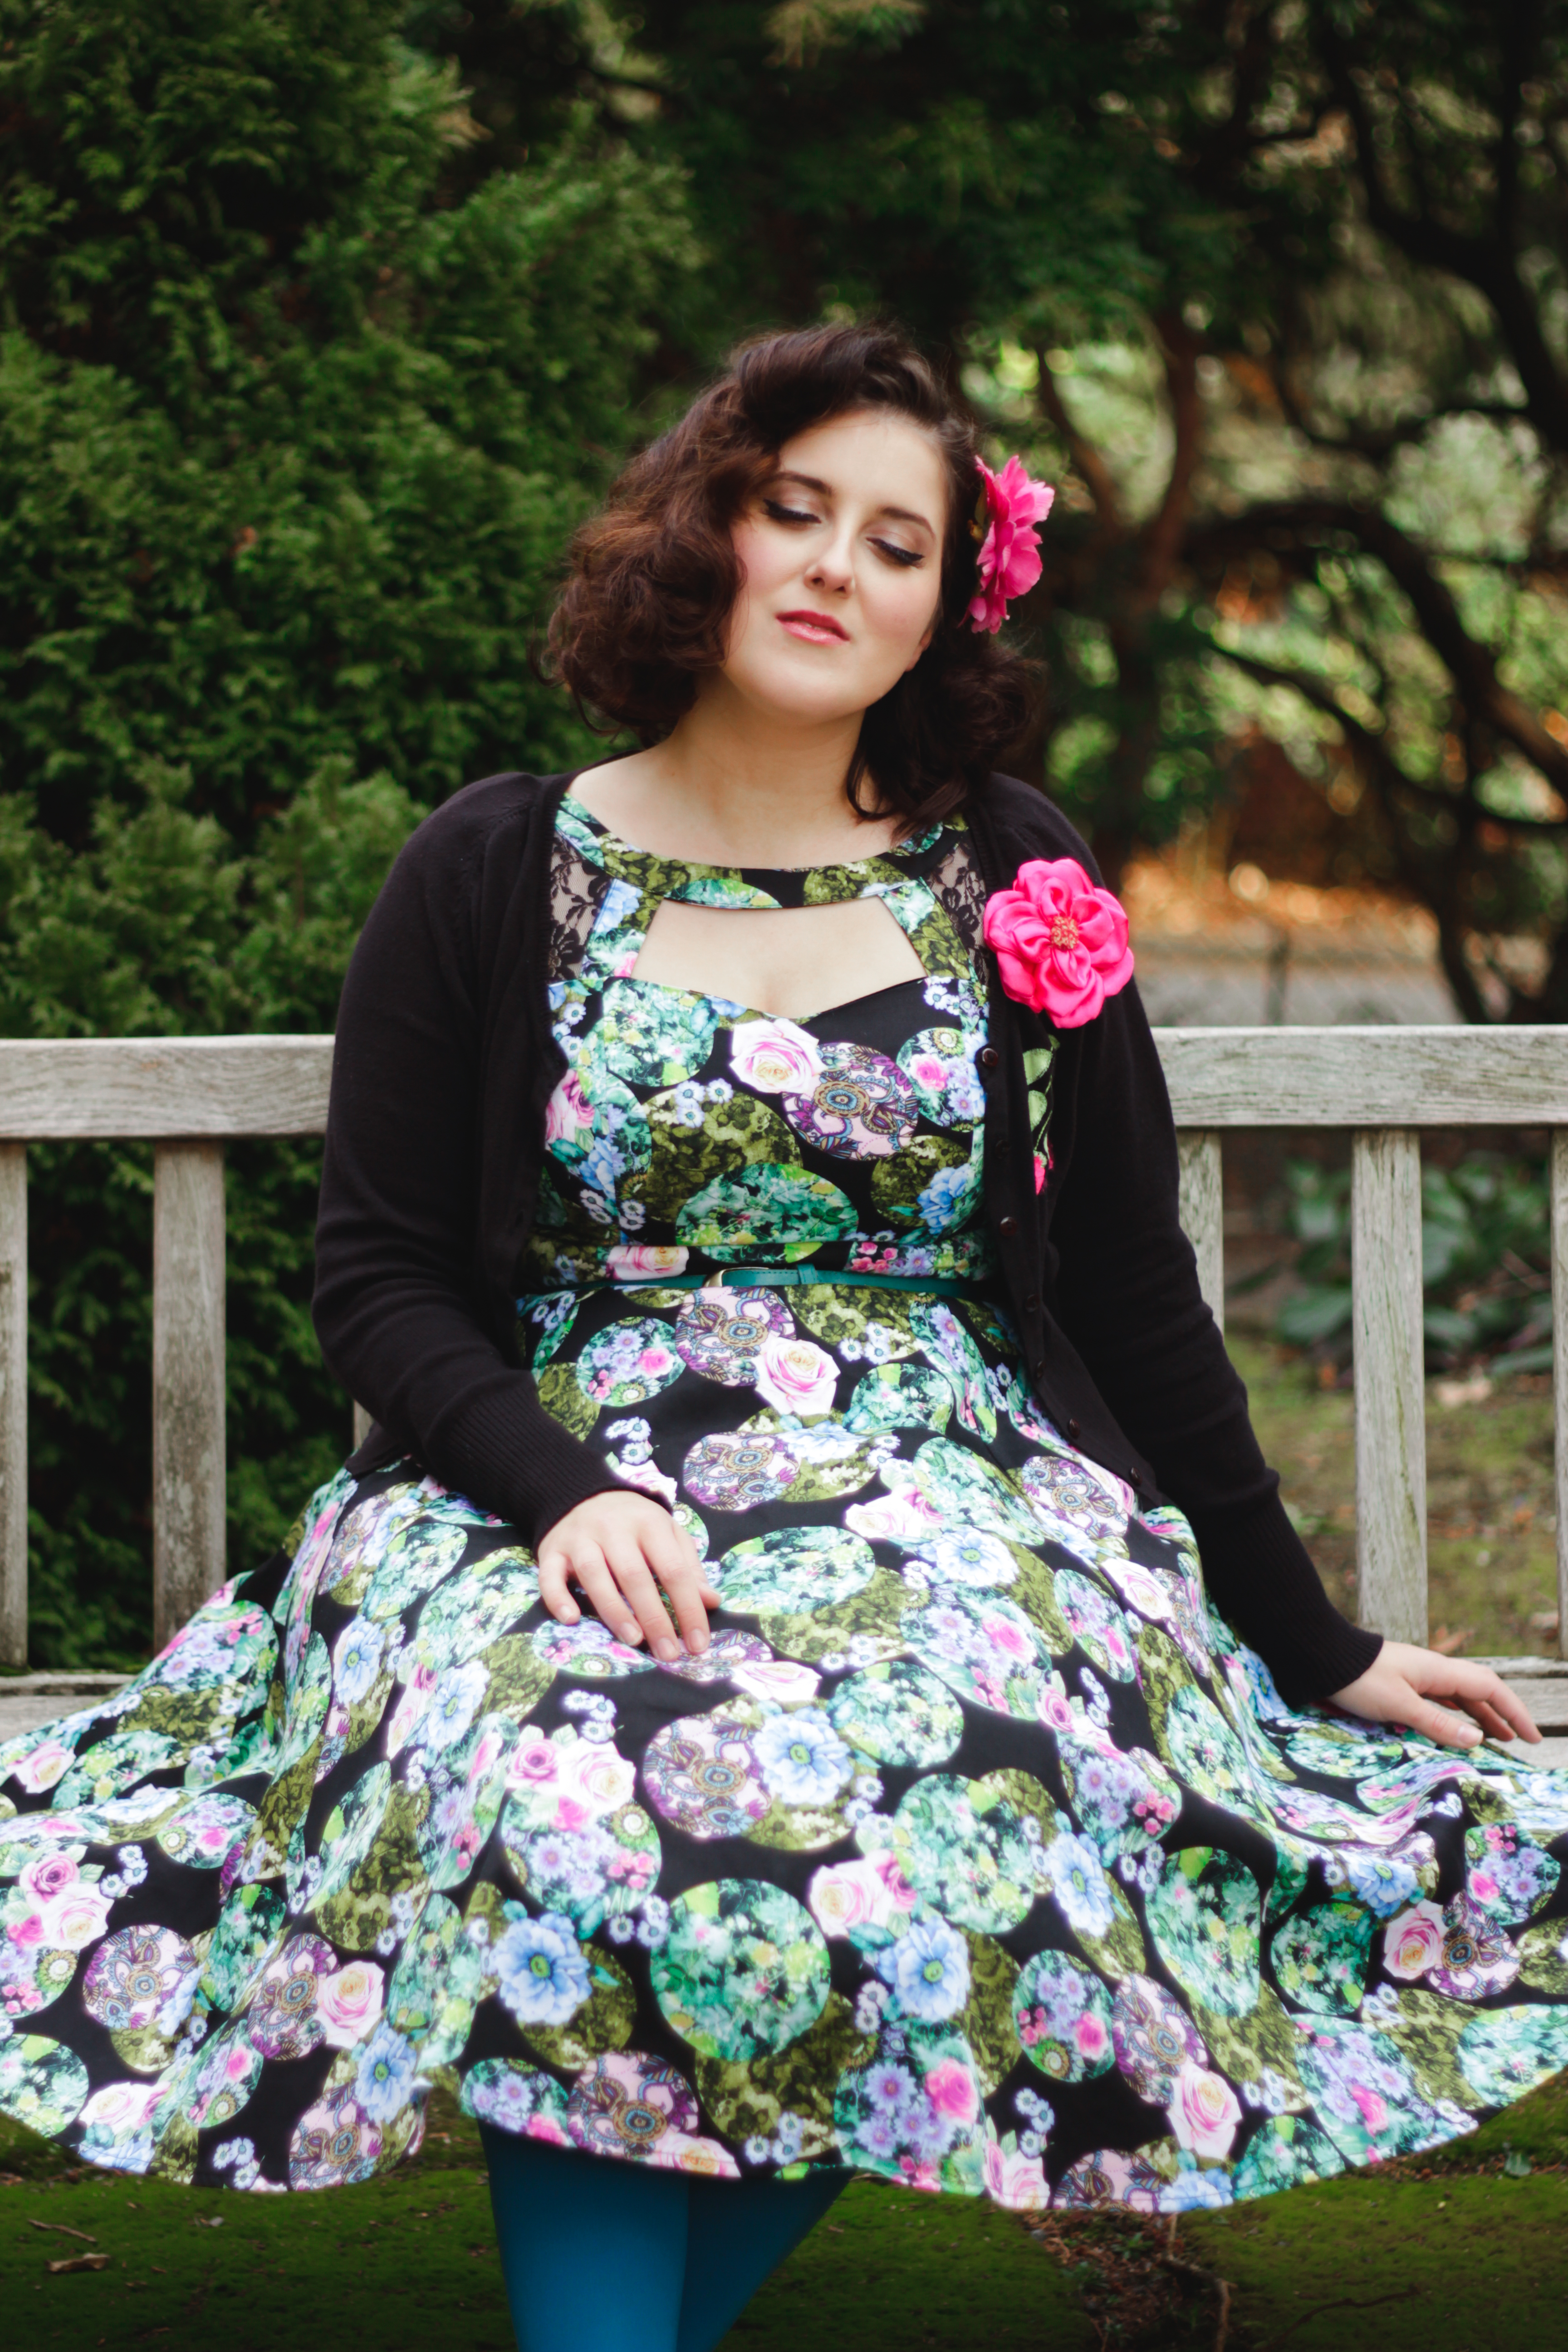 Hearts and Roses of London dress, Flower Cardigan, and the Gardens of ...